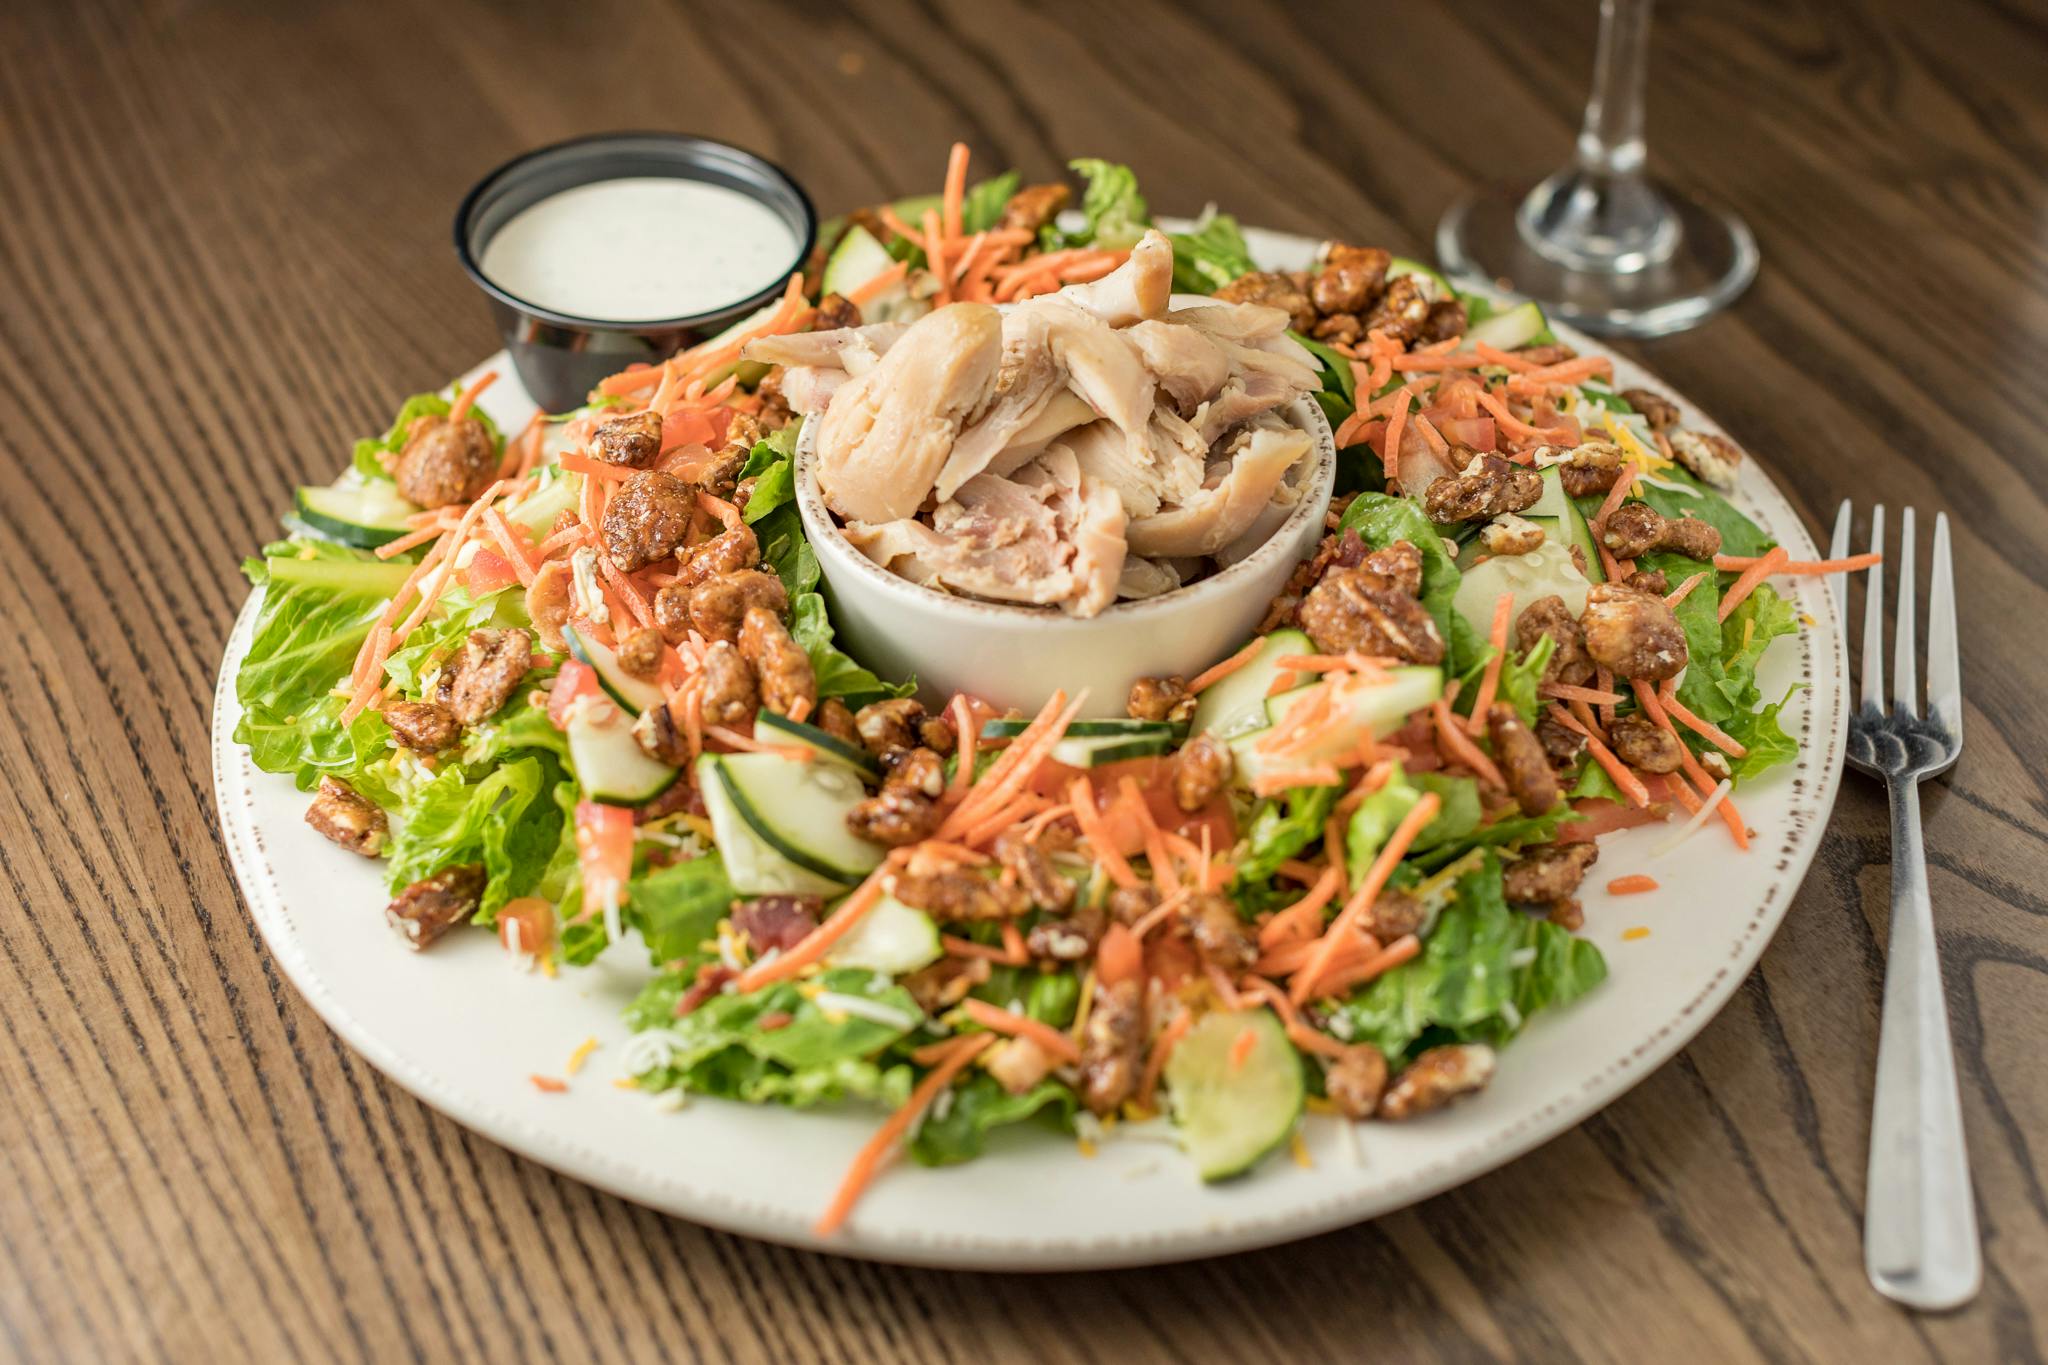 Rotisserie Chicken Salad from Grizzly's Wood-Fired Grill in Eau Claire, WI